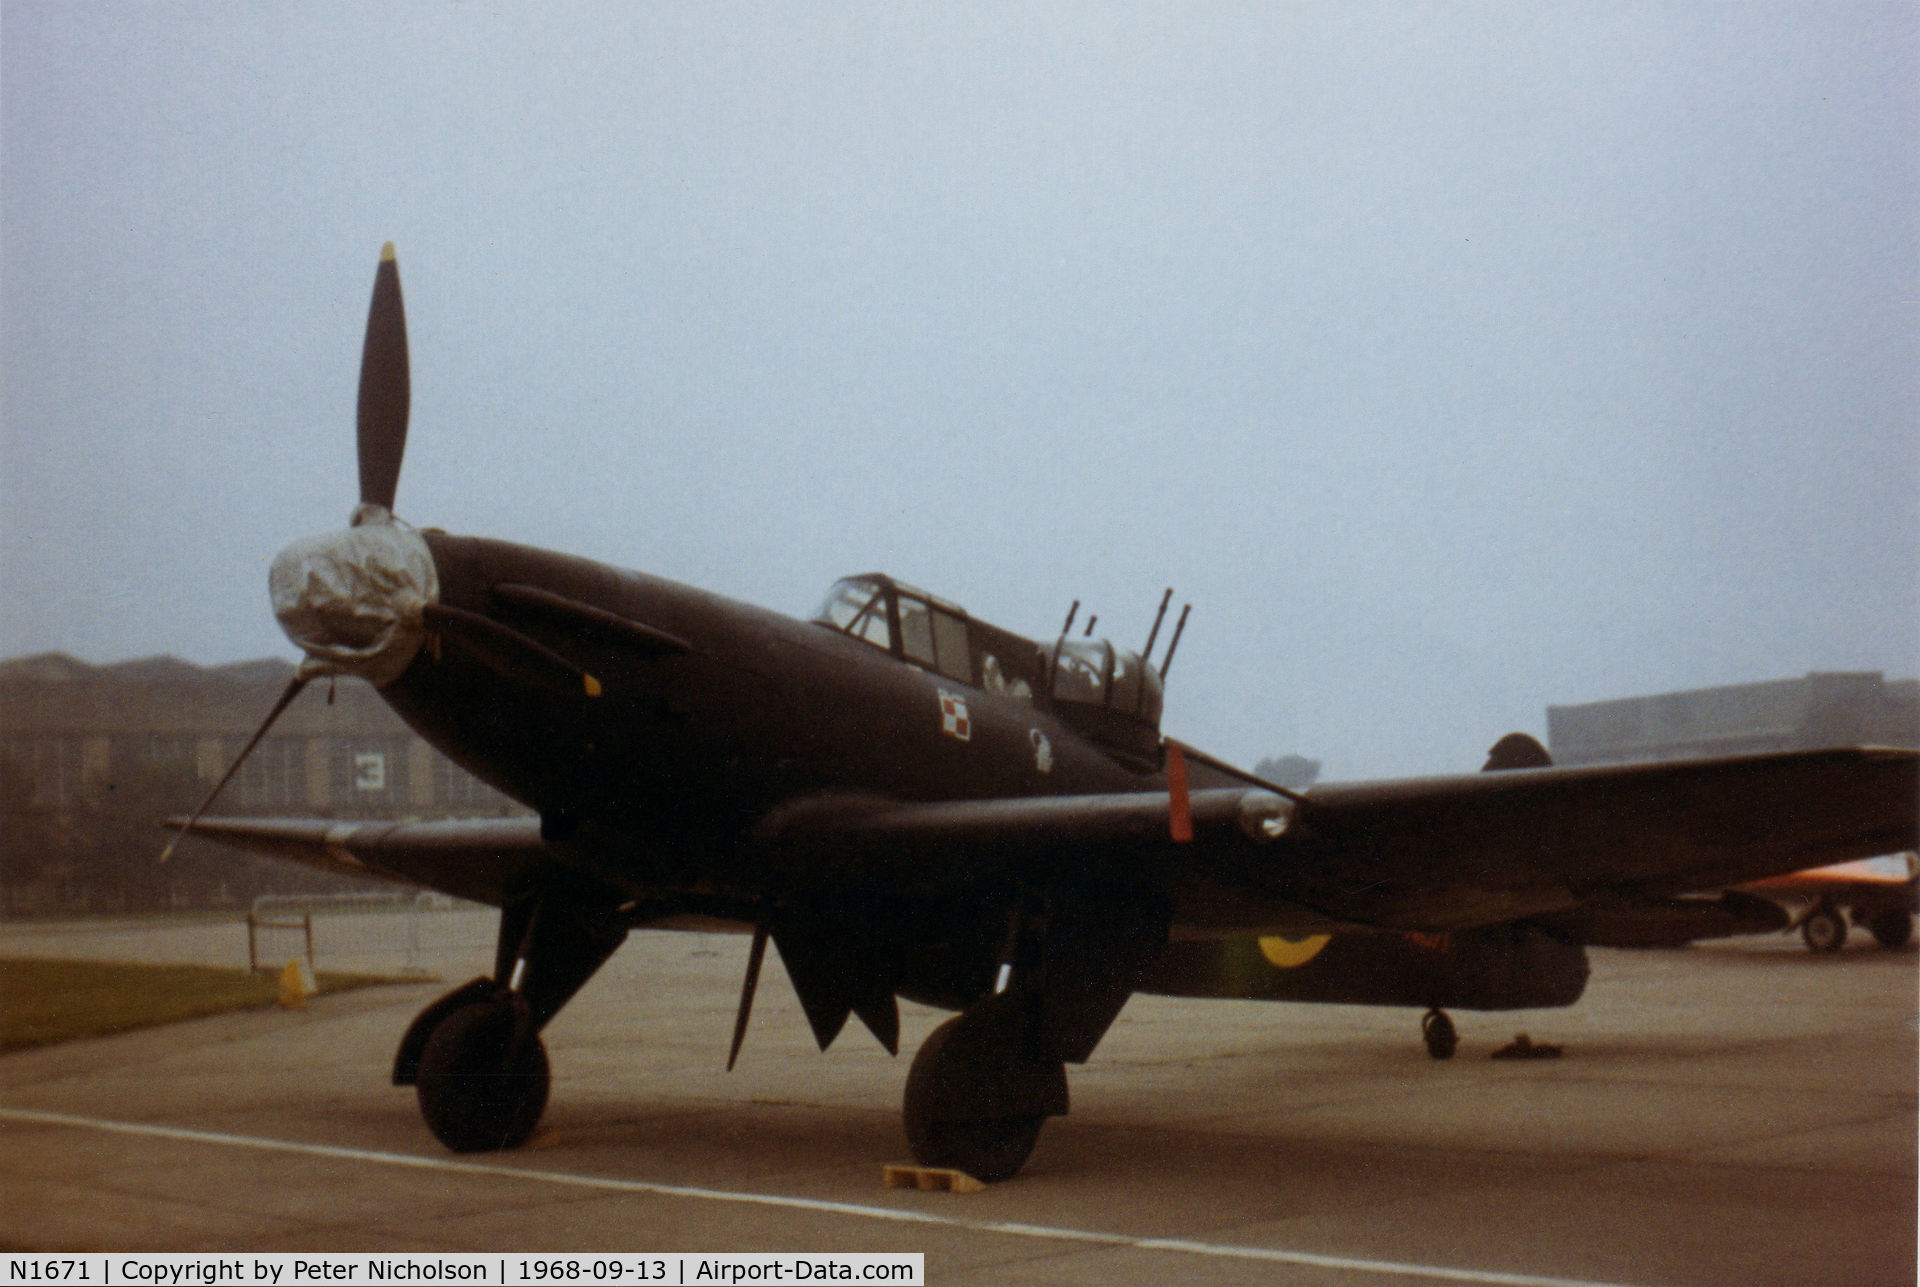 N1671, 1938 Boulton Paul Defiant I C/N Not found N1671, Boulton-Paul Defiant 1 in 307 Squadron markings on display at the 1968 RAF Finningley Airshow. It was then part of the Station Collection and now preserved at the RAF Museum at Hendon.